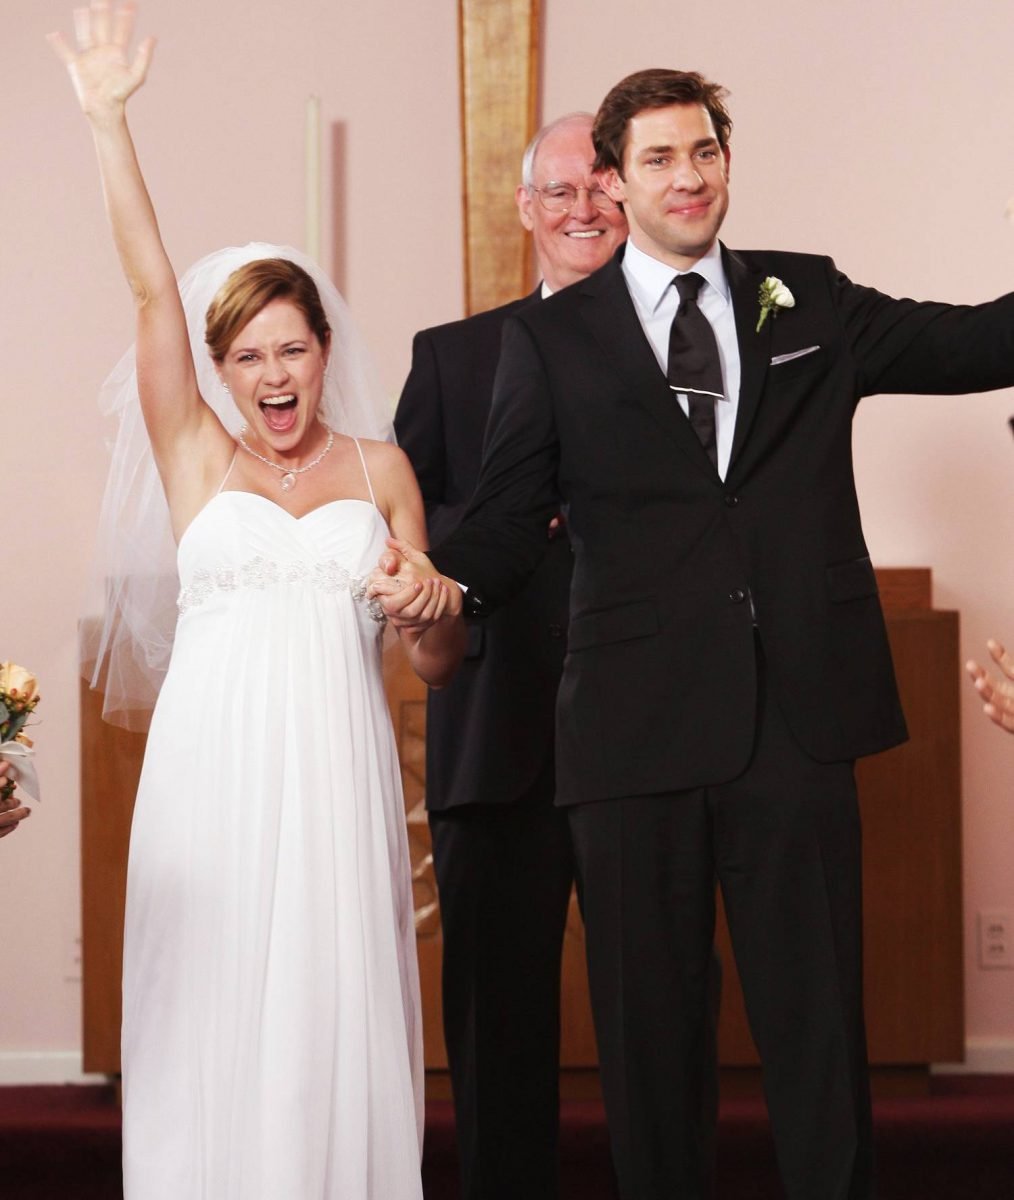 Pam And Jim The Office, Smile, Wedding dress, Bride, Facial expression, Dress, Bridal clothing, Flash photography, Happy, Gown, Standing